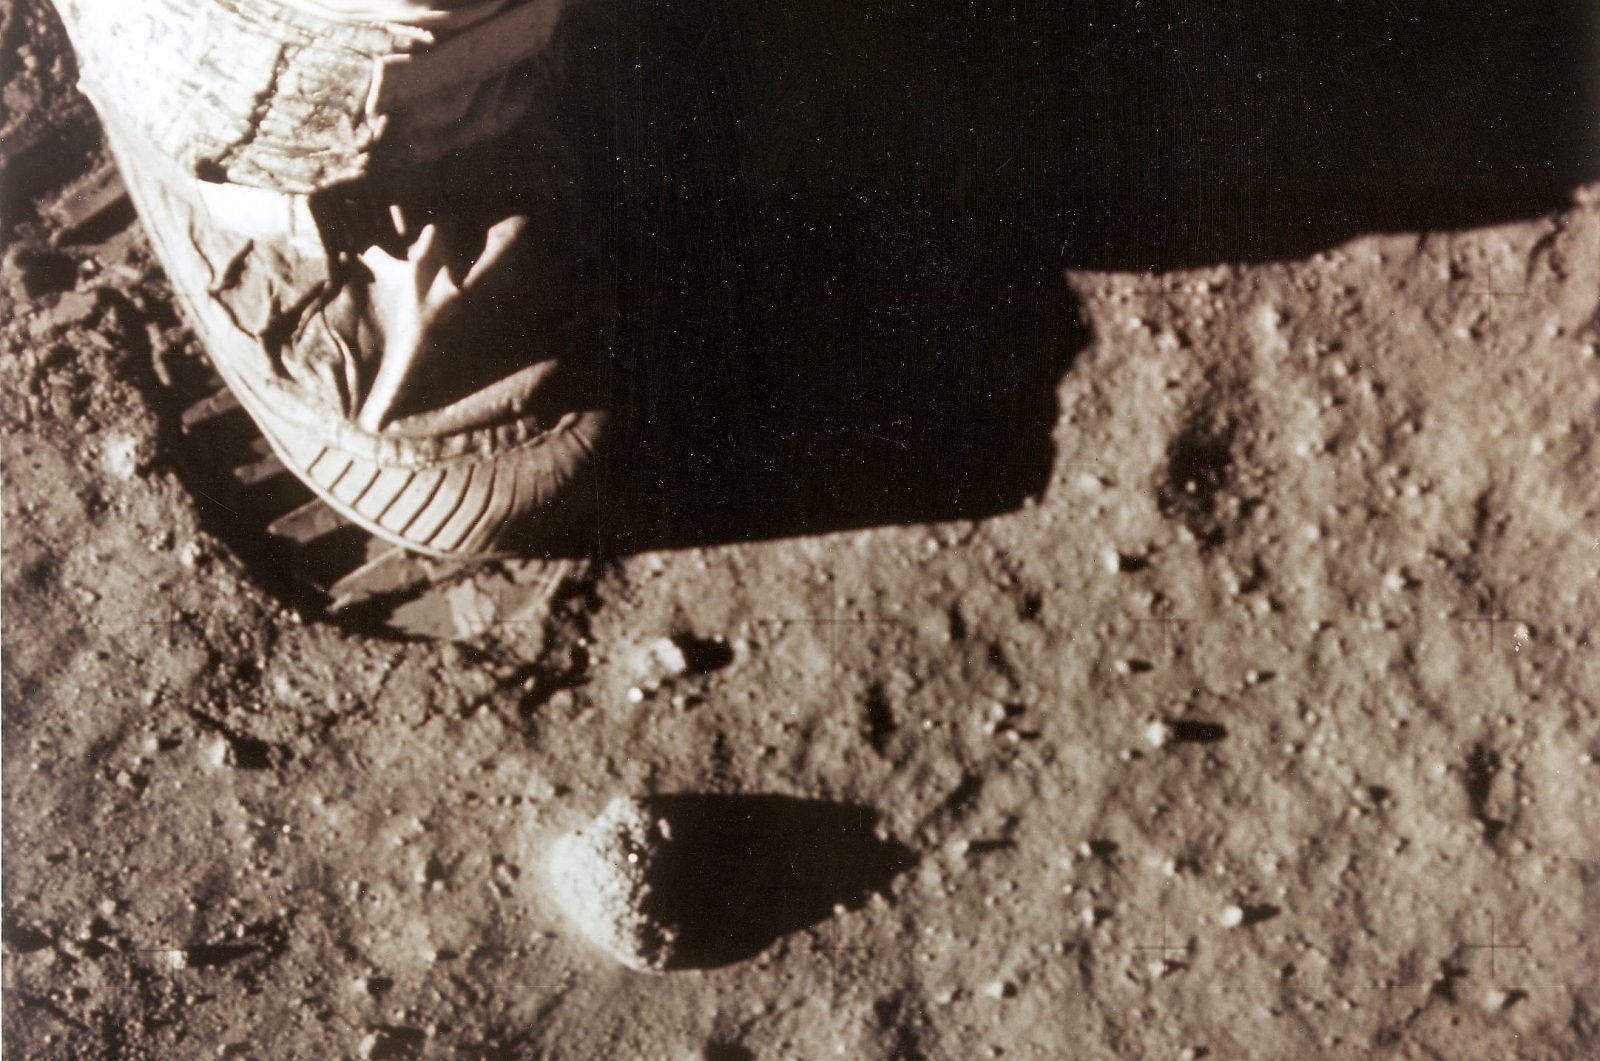 Apollo 11 commander Neil Armstrong&#039;s right foot leaves a footprint in the lunar soil as he and Edwin &quot;Buzz&quot; Aldrin become the first men to set foot on the surface of the moon, July 20, 1969. (NASA via AFP)